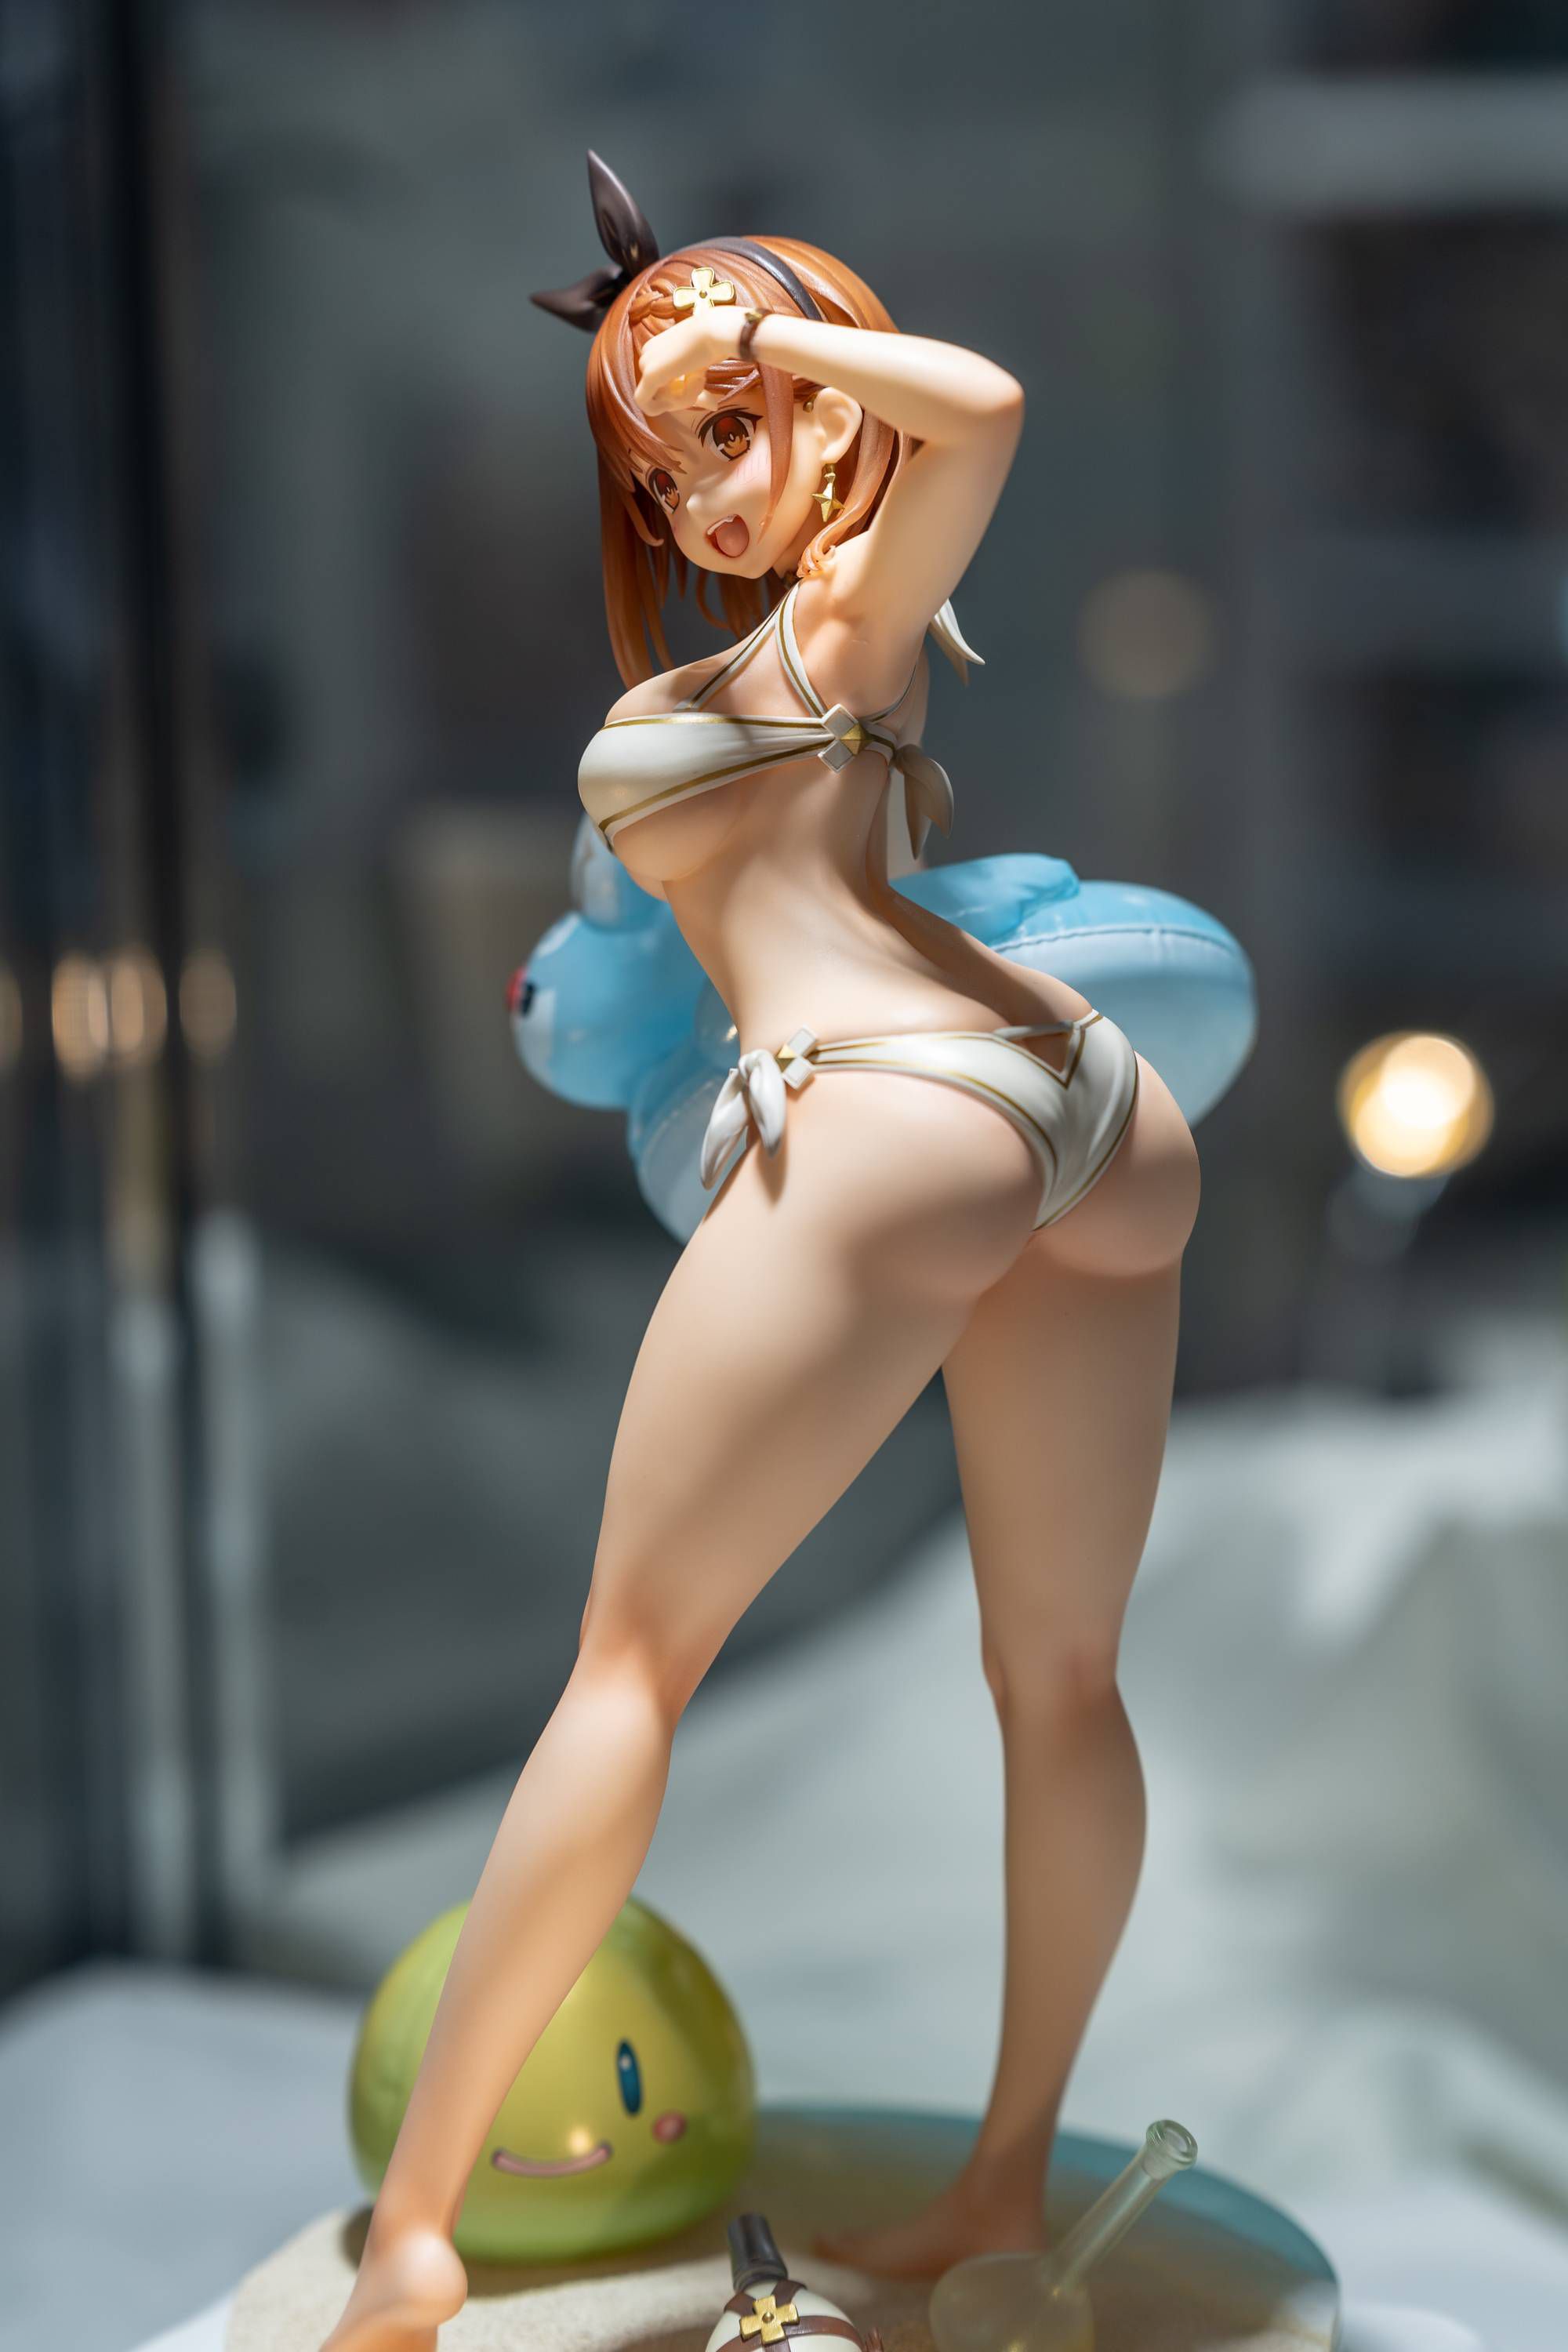 【Image】New figure wwwwwwww too etch called "Change of clothes riser" 6